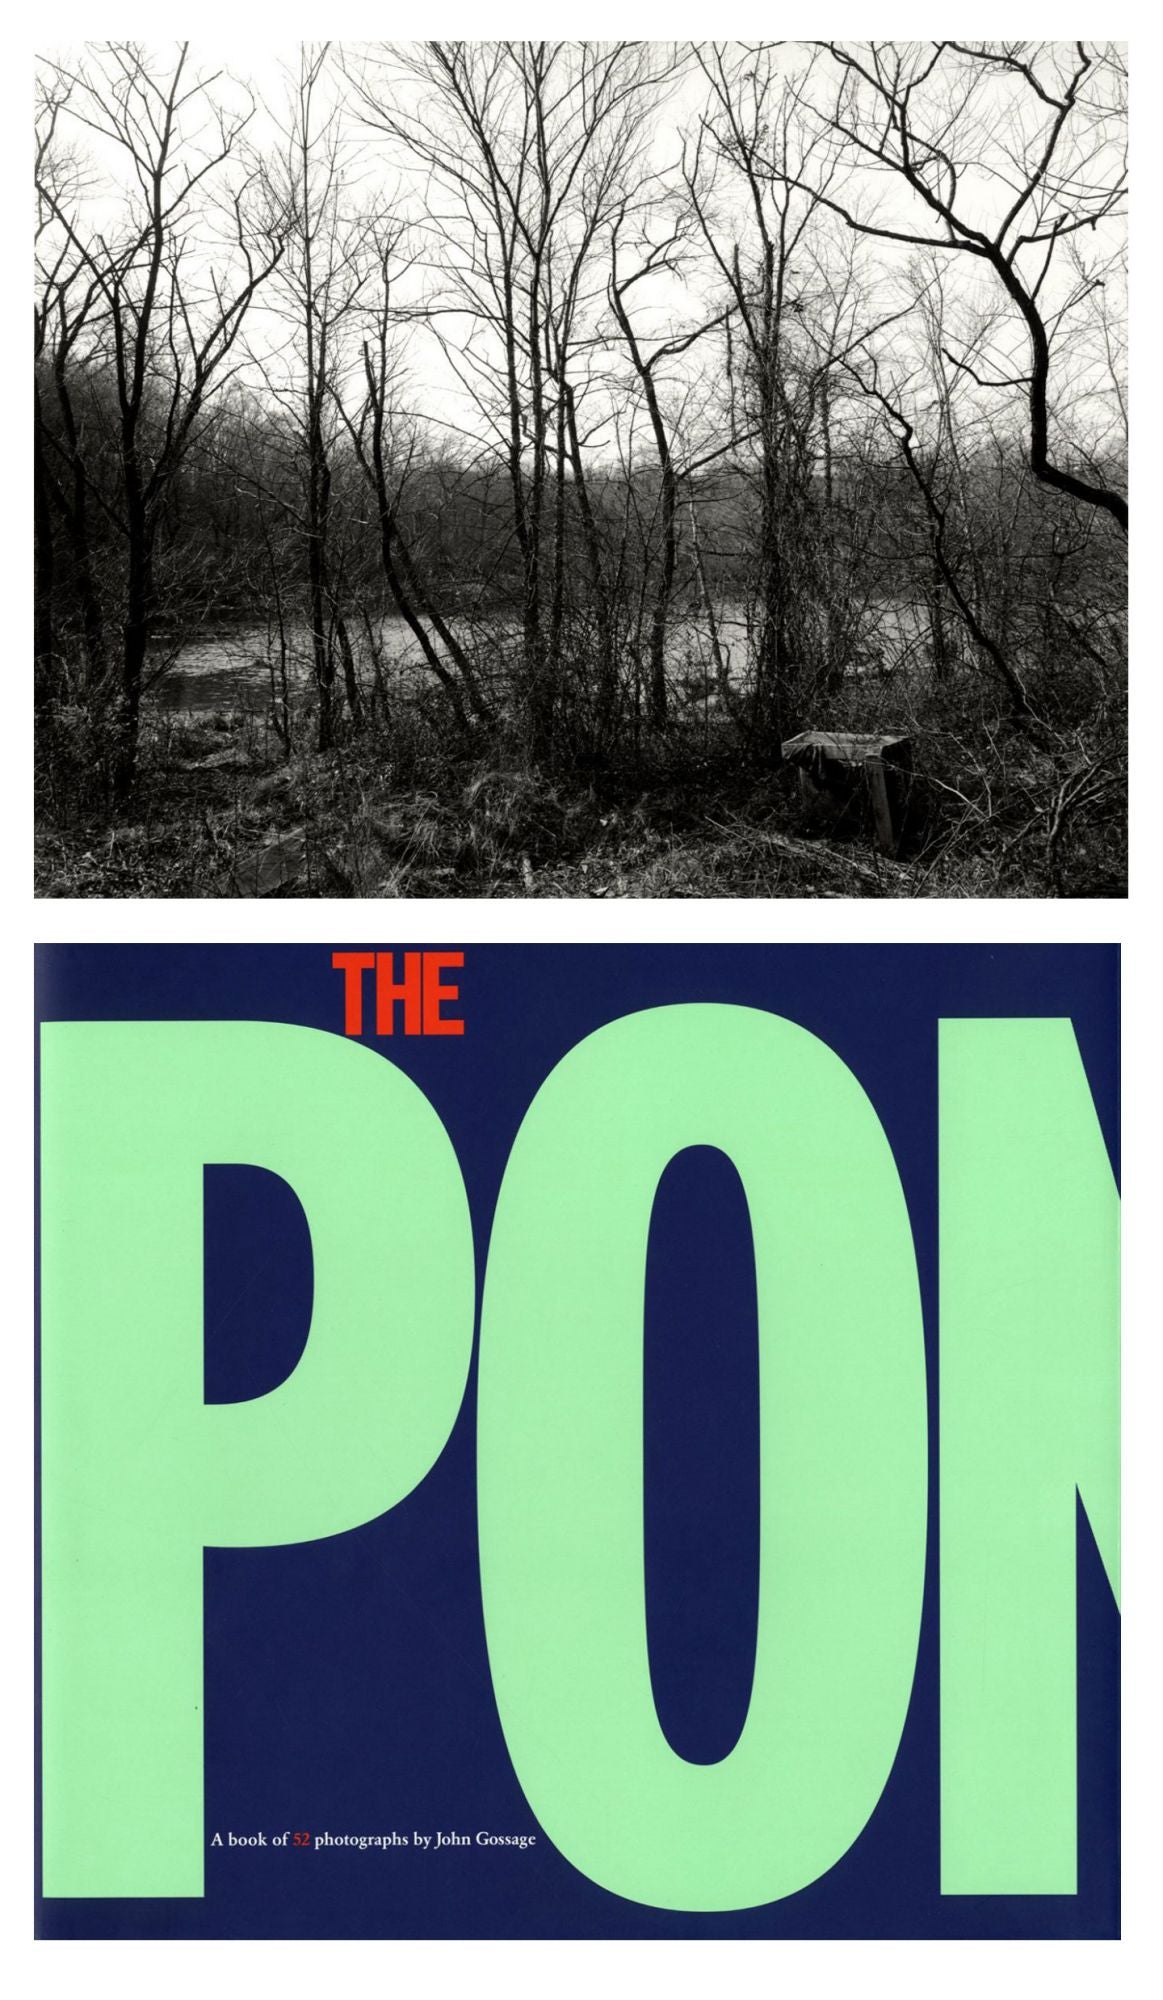 John Gossage: The Pond (Second Edition, Aperture Reissue), Limited Edition Box Set (with Loose and Tipped-In Gelatin Silver Prints)